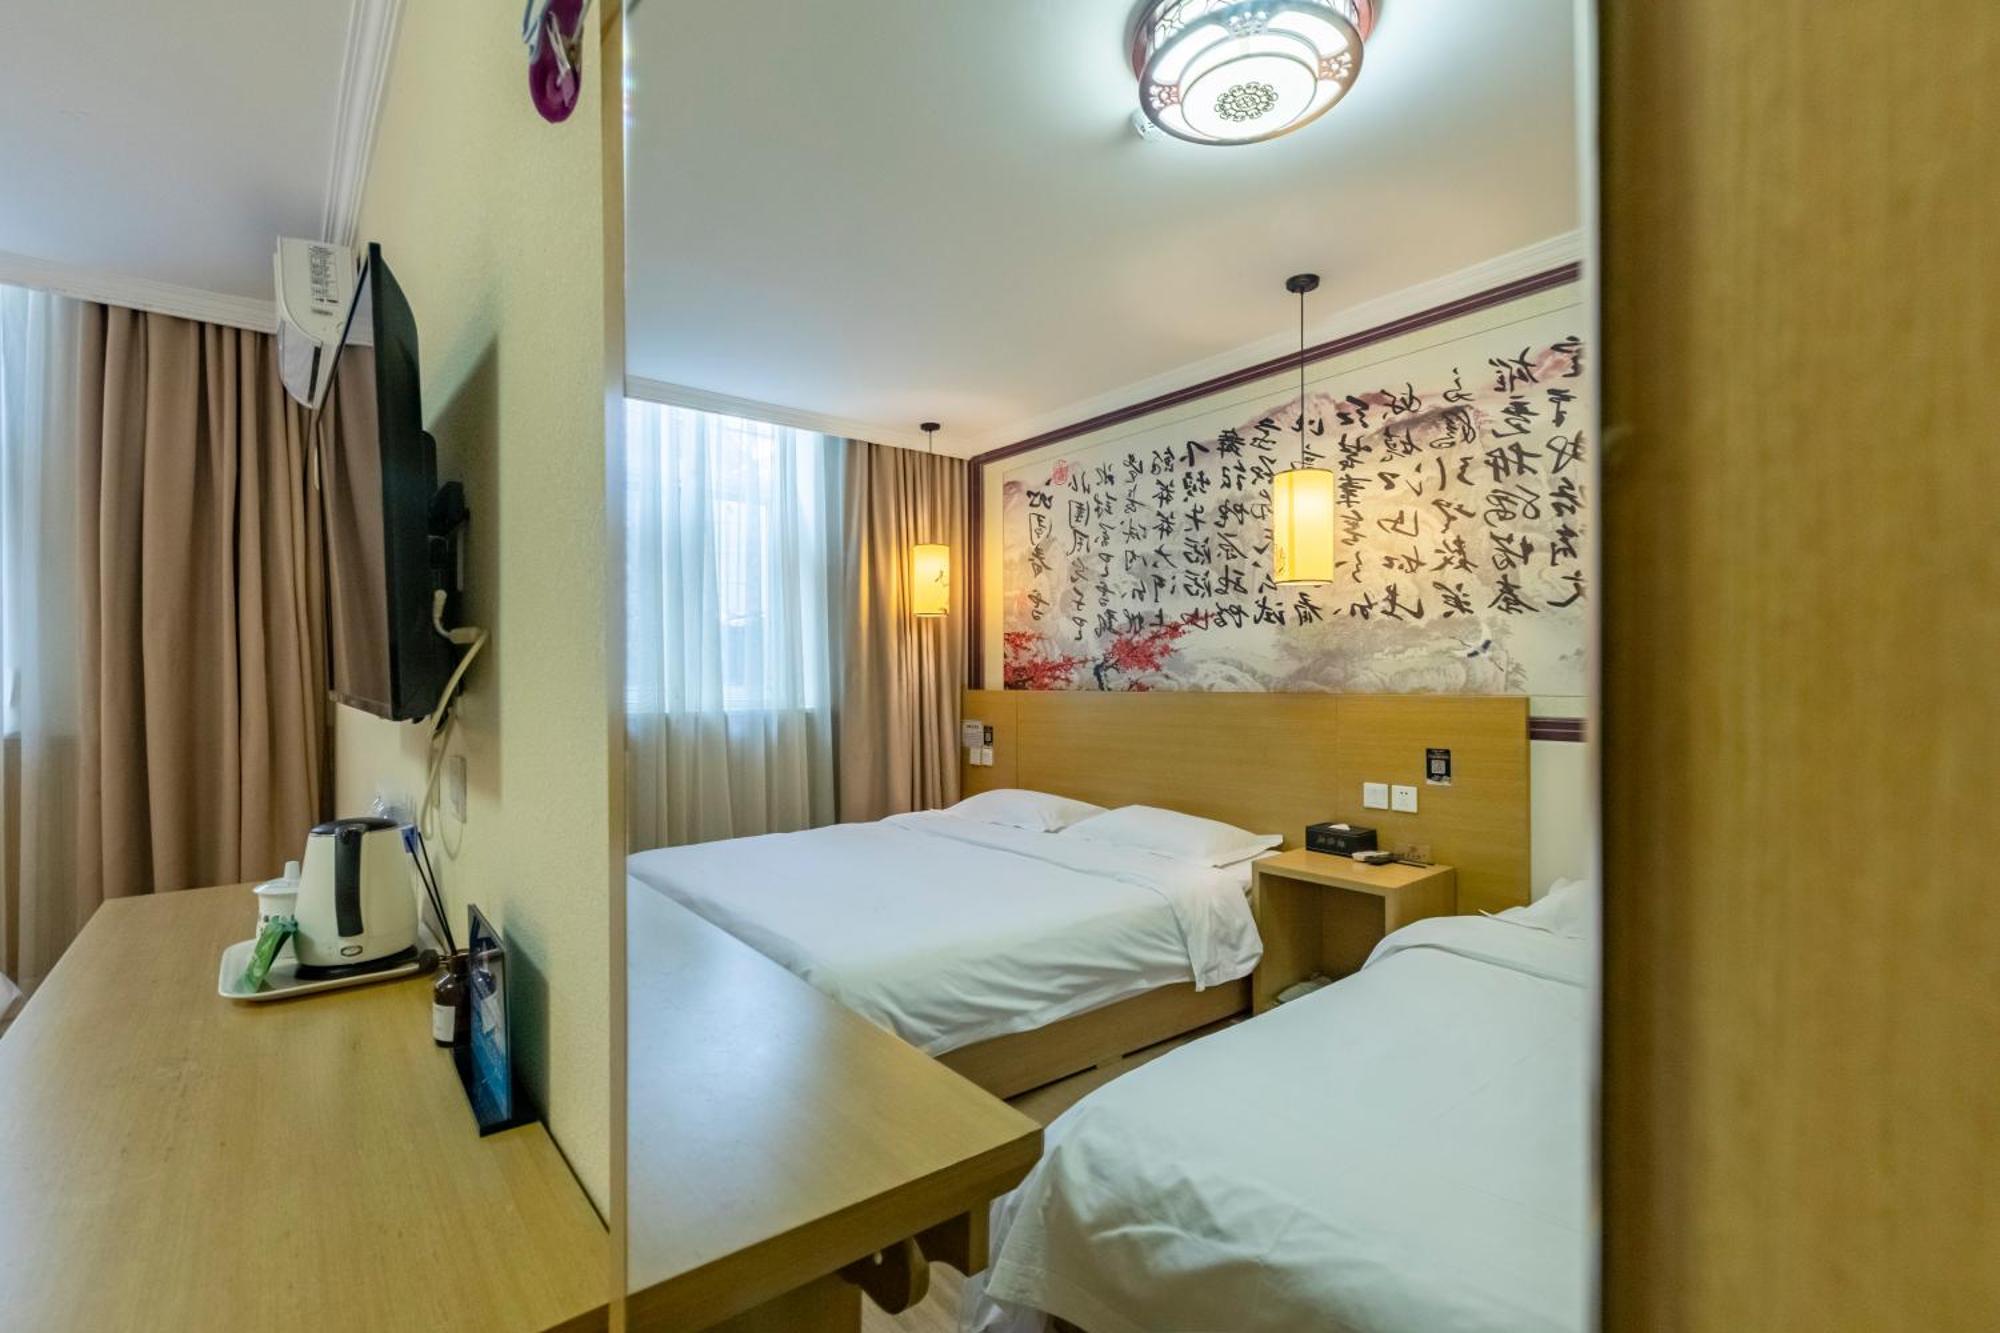 Happy Dragon City Center Alley Hotel -In The City Center With Big Window&Heater, Ticket Service&Free Coffee&Food Recommendation,Near Tian Anmen Forbiddencity,Easy To Get Traditional Walking Area&Shichahai Peking Kültér fotó